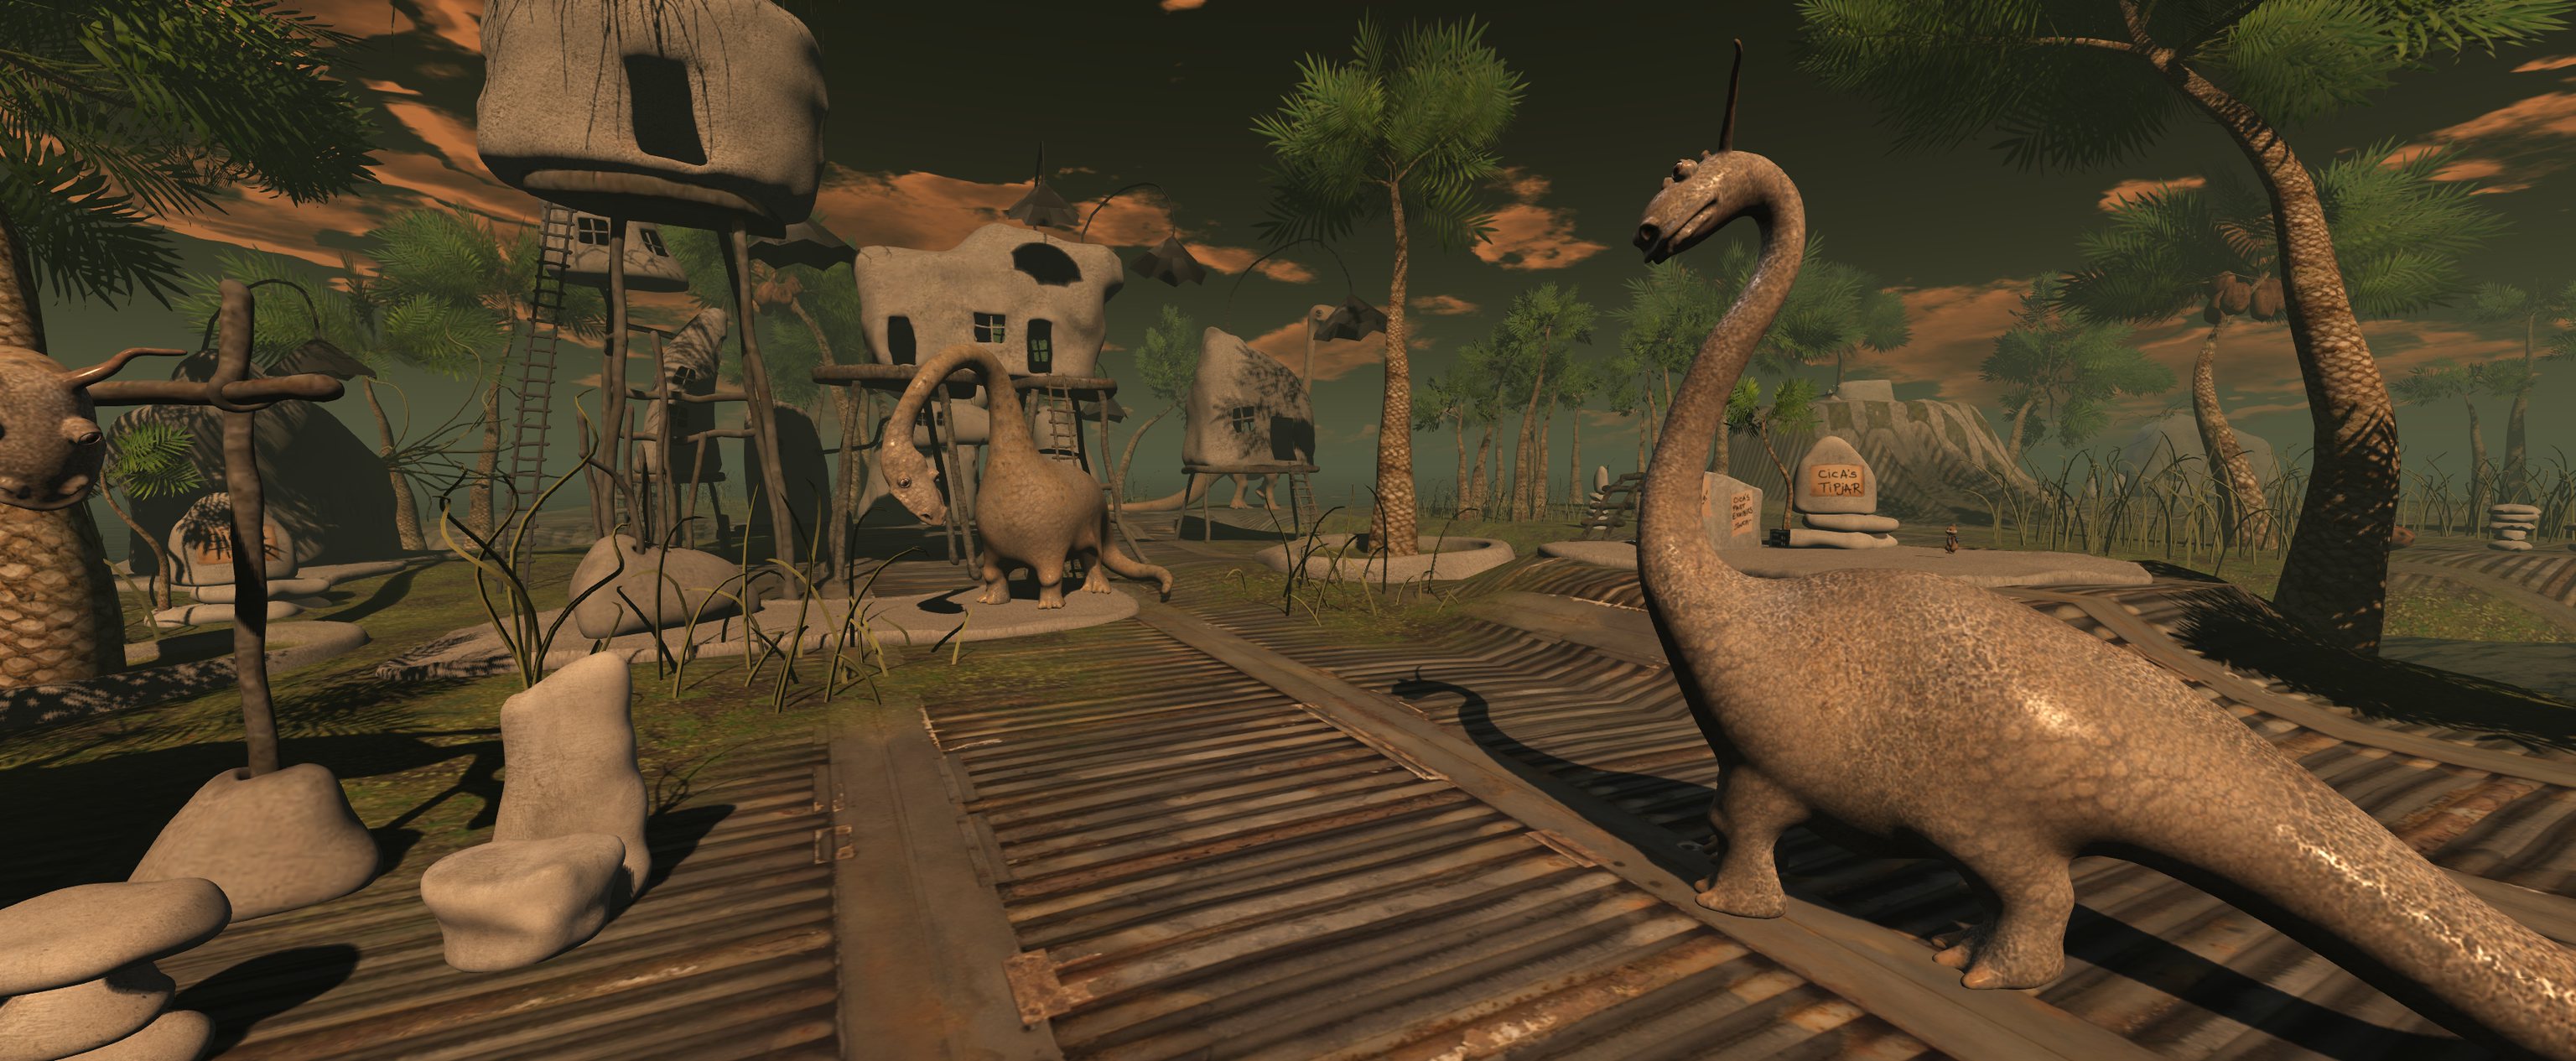 Dinosaurs and Coconuts in Second Life